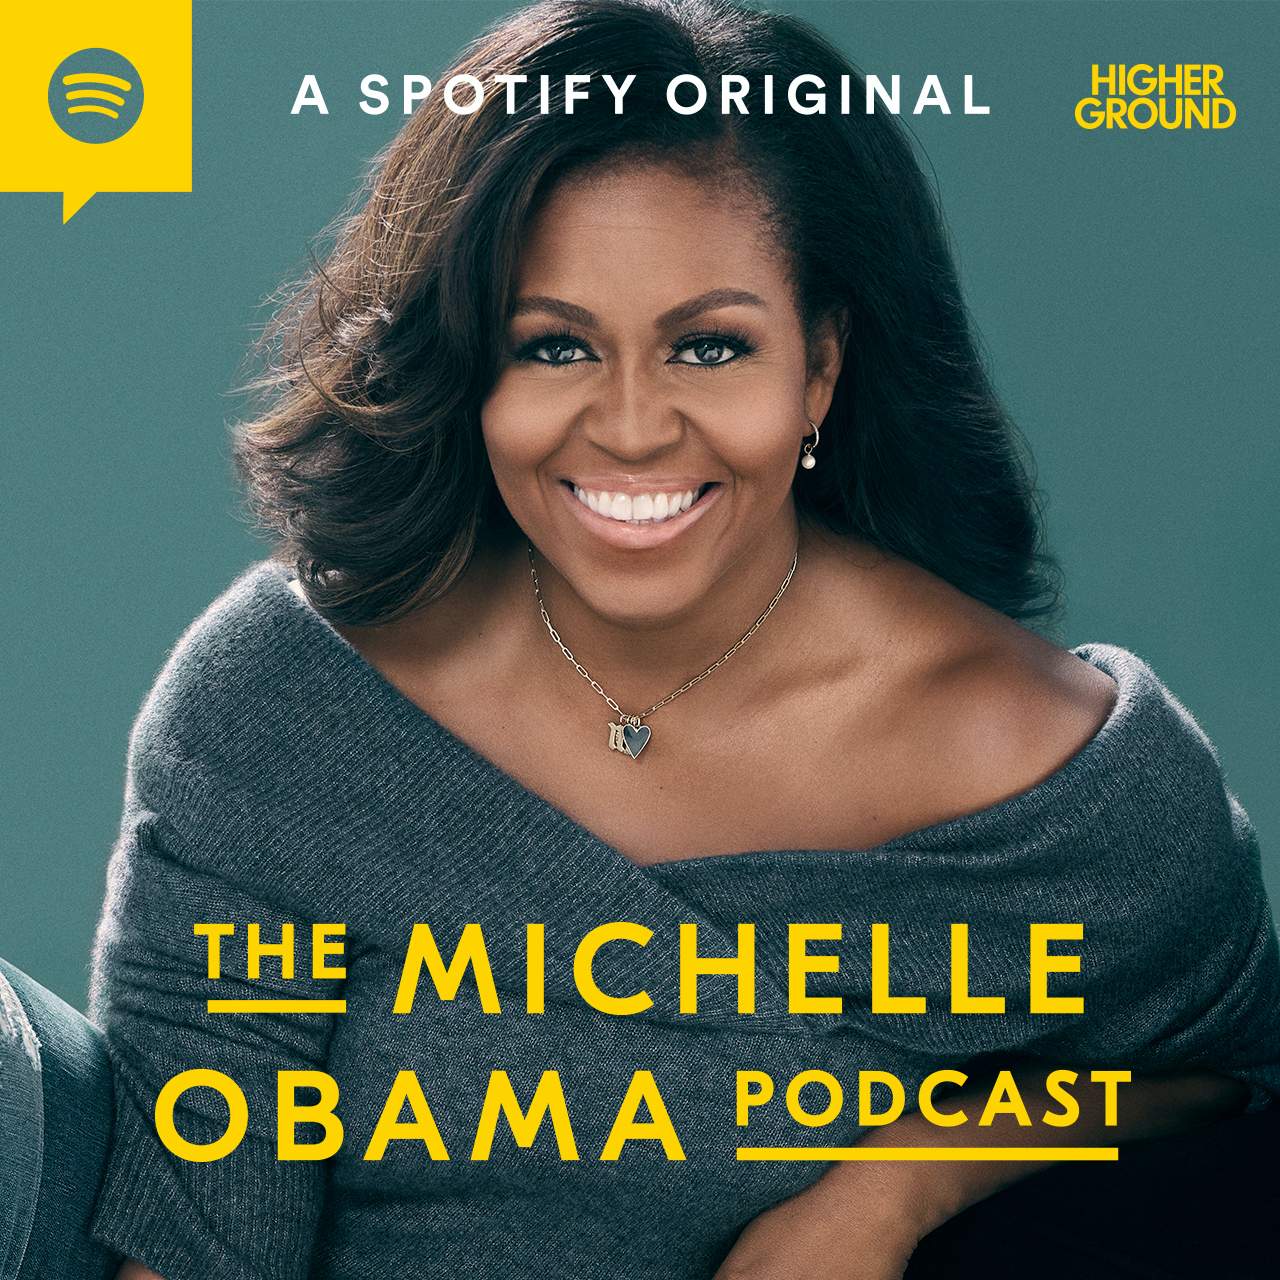 Spotify Announce The Michelle Obama Podcast